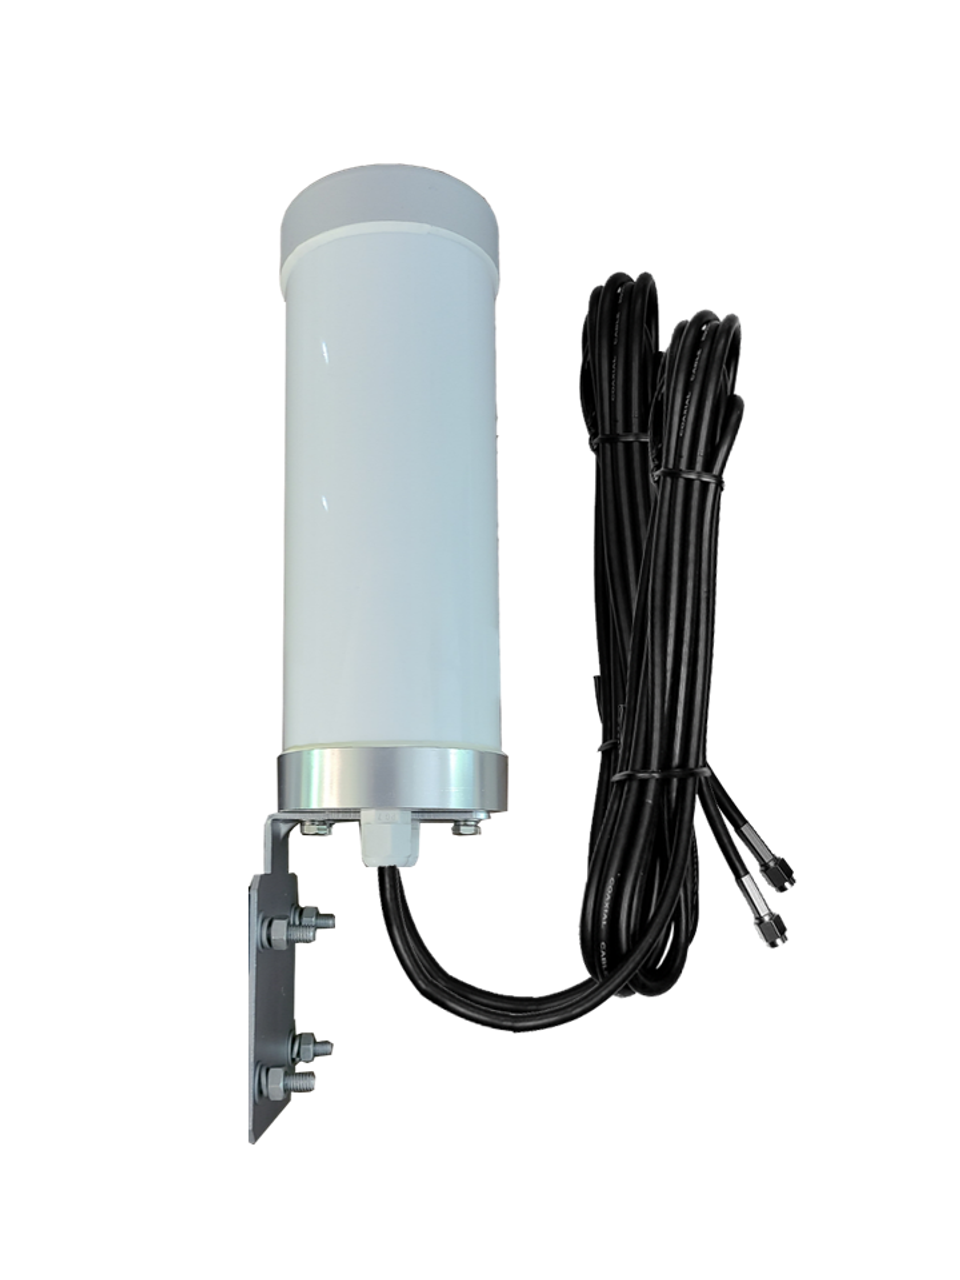 M29 Omni Directional MIMO 2 x Cellular 4G 5G LTE Antenna for AT&T IFWA40 Router w/ 2 x 16ft Cables - SMA Male